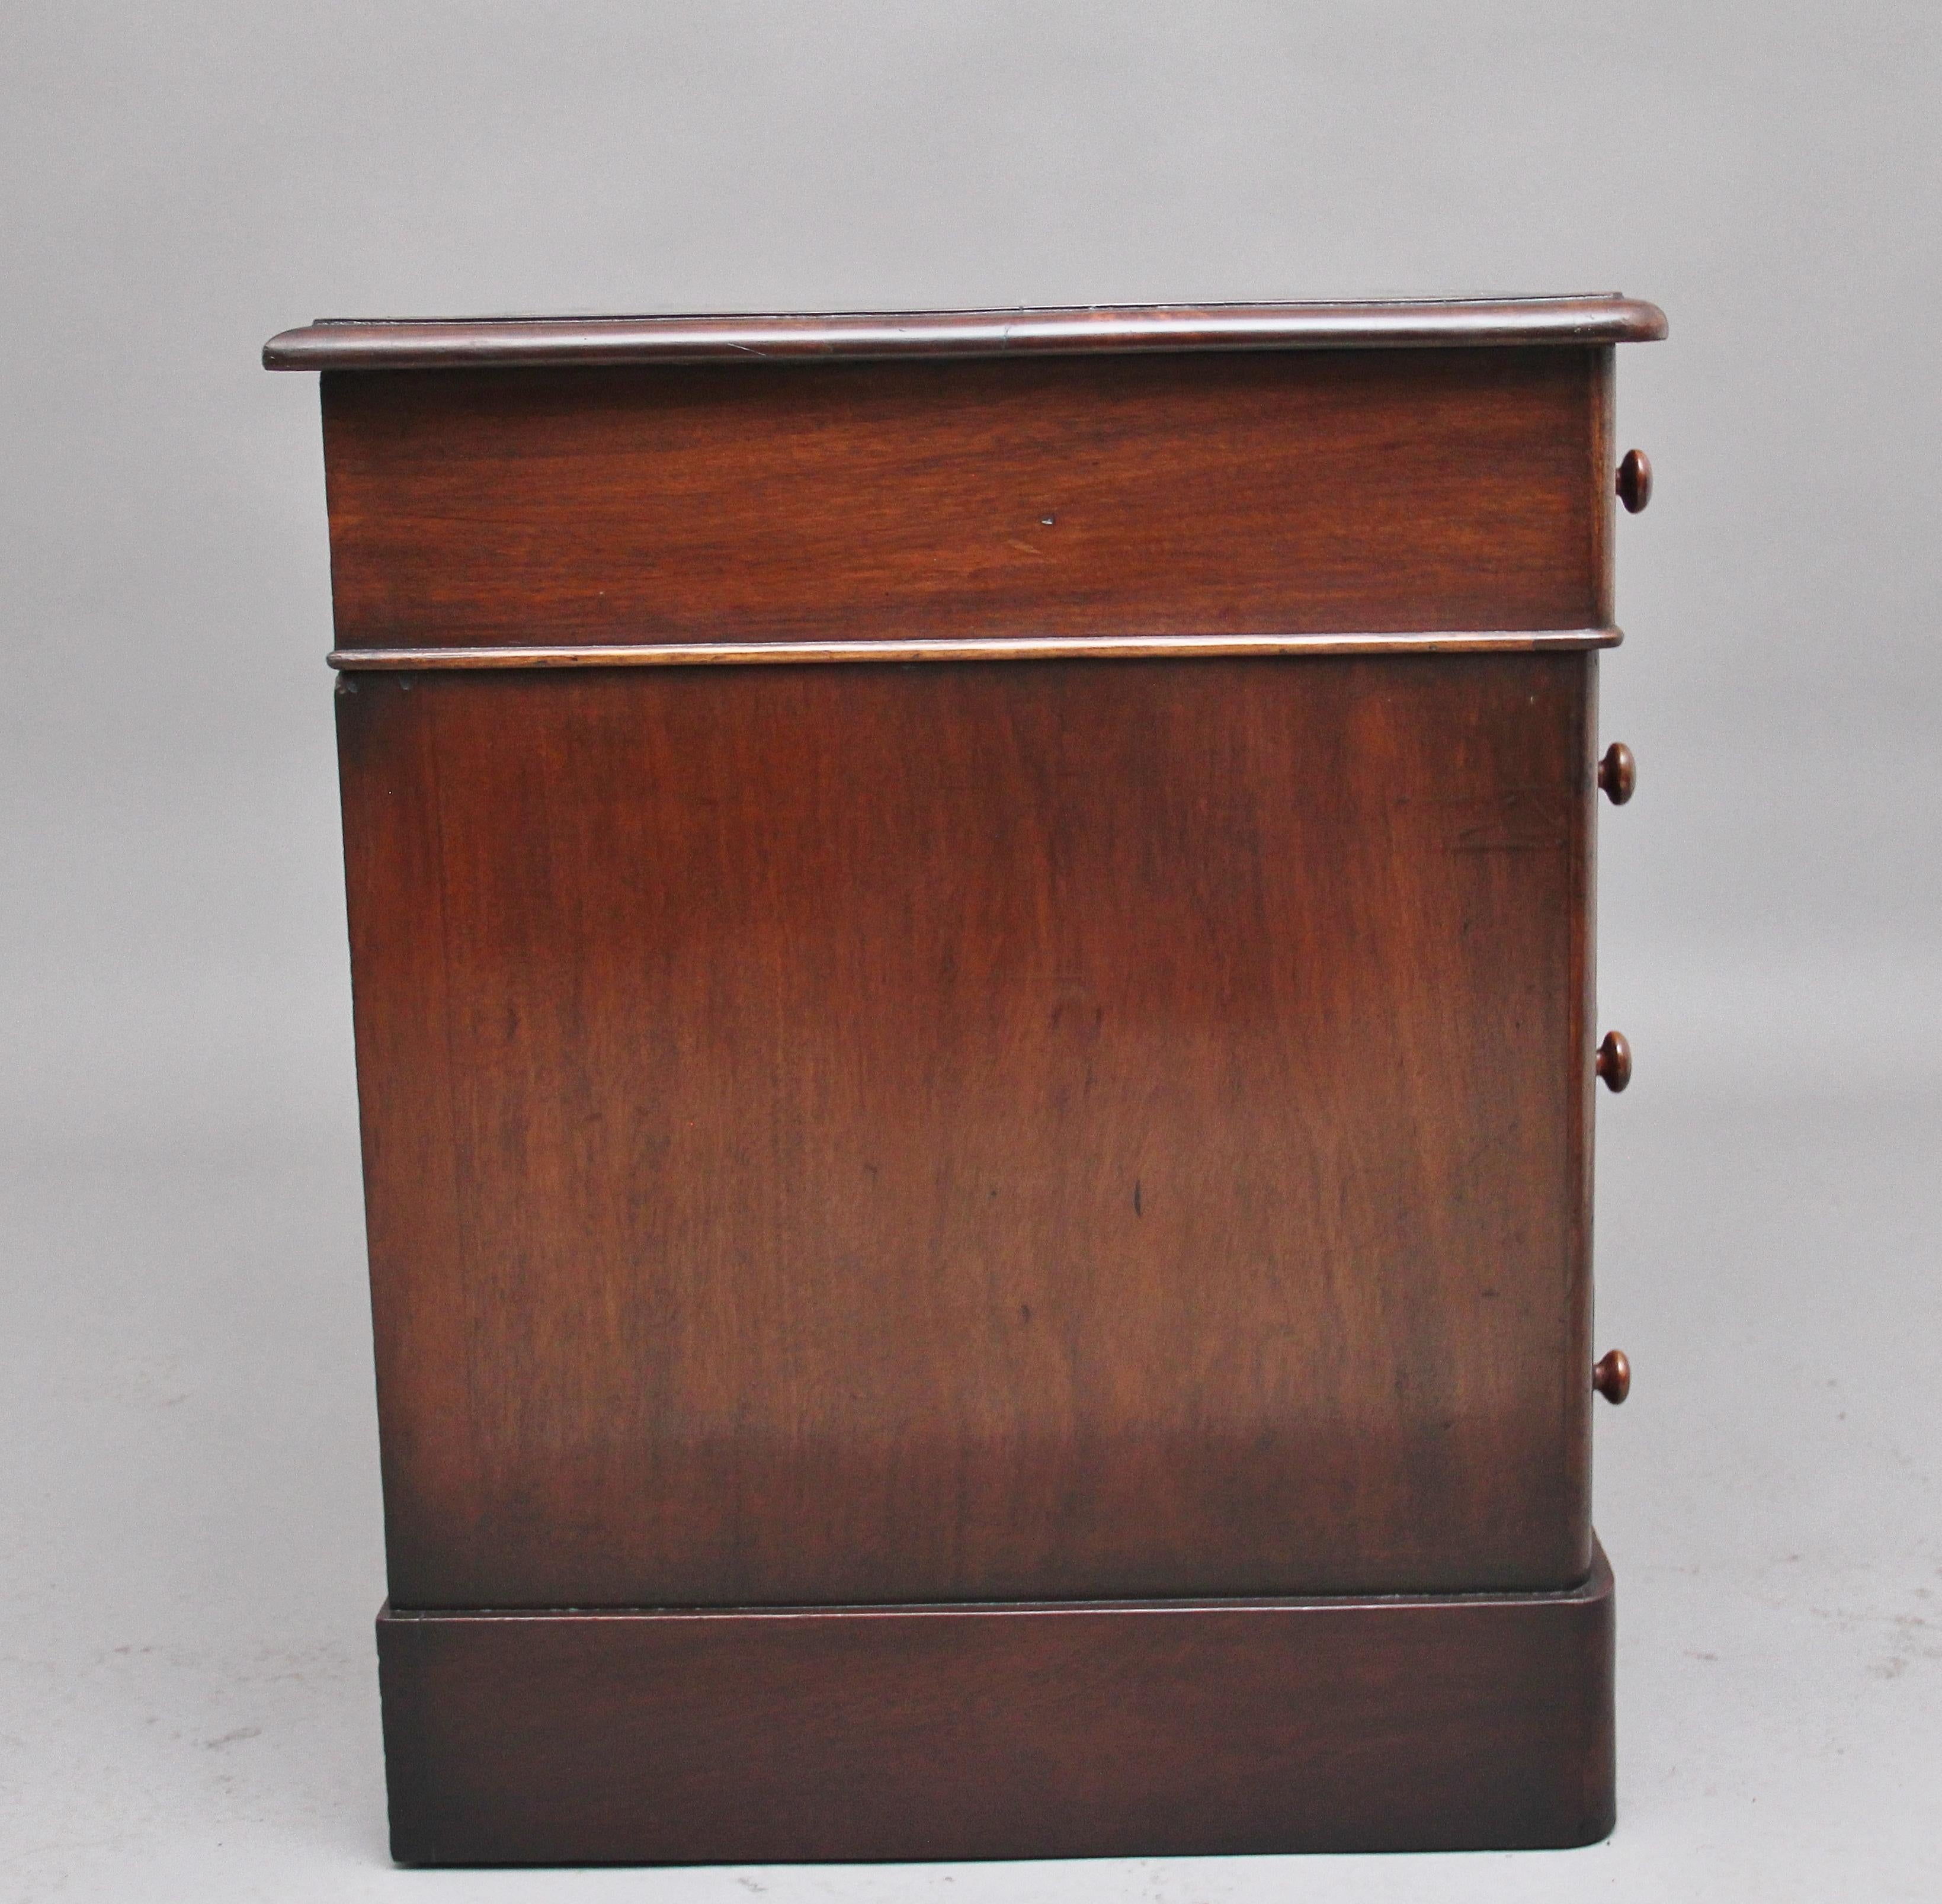 British Early 19th Century Mahogany Pedestal Desk For Sale